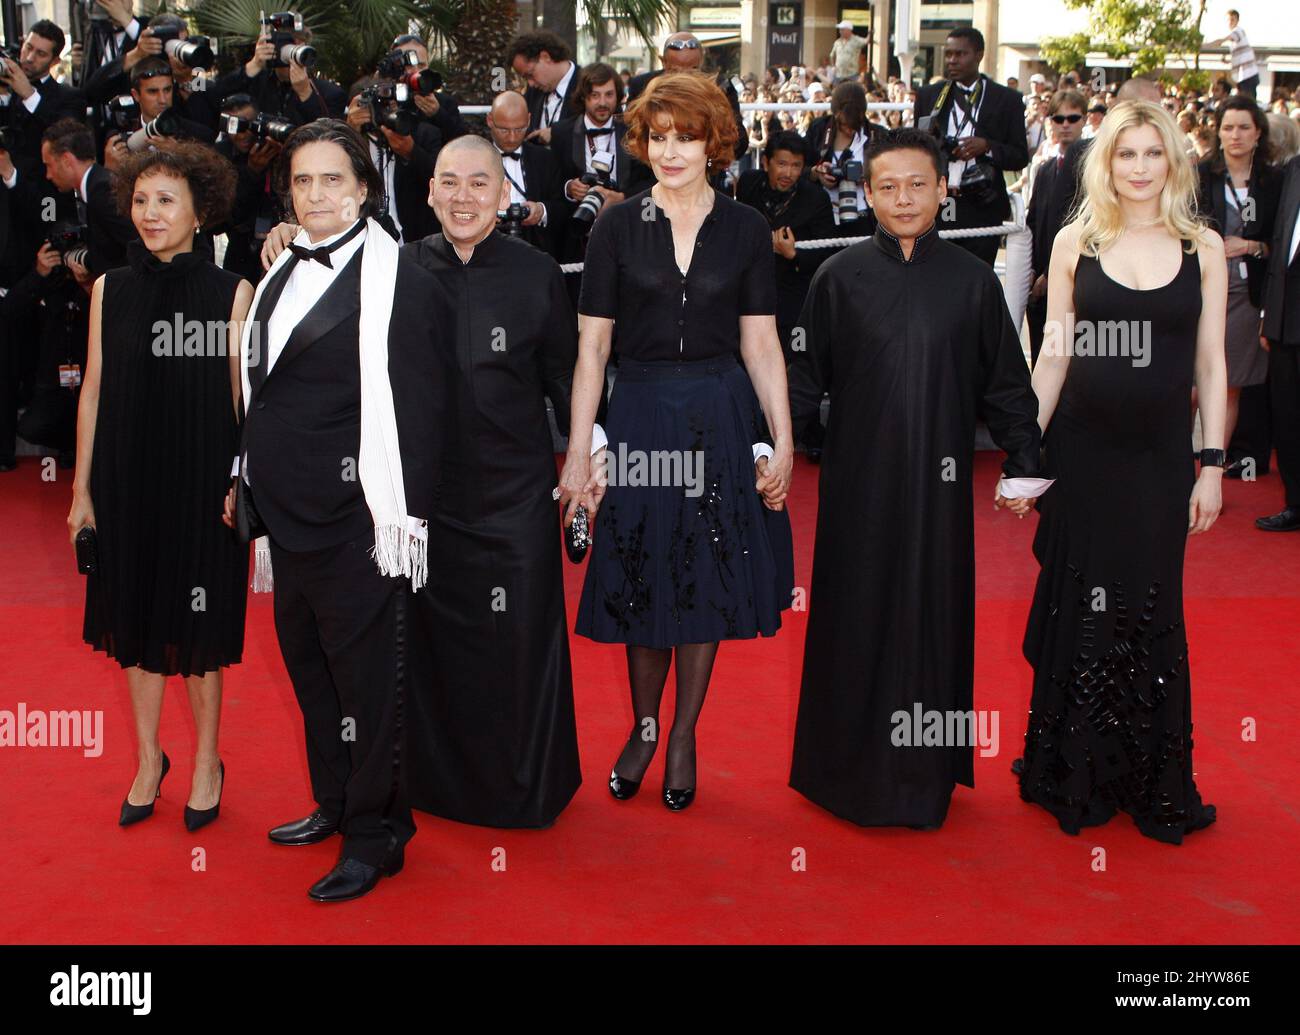 Yi-Ching Lu, Kang-sheng Lee, Fanny Ardant, Ming-liang Tsai, Jean-Pierre Leaud, Kang-sheng Lee, wife Laetitia Casta at the premiere of the new film Visage, during the Cannes Film Festival, at the Palais de Festival in Cannes, France Stock Photo